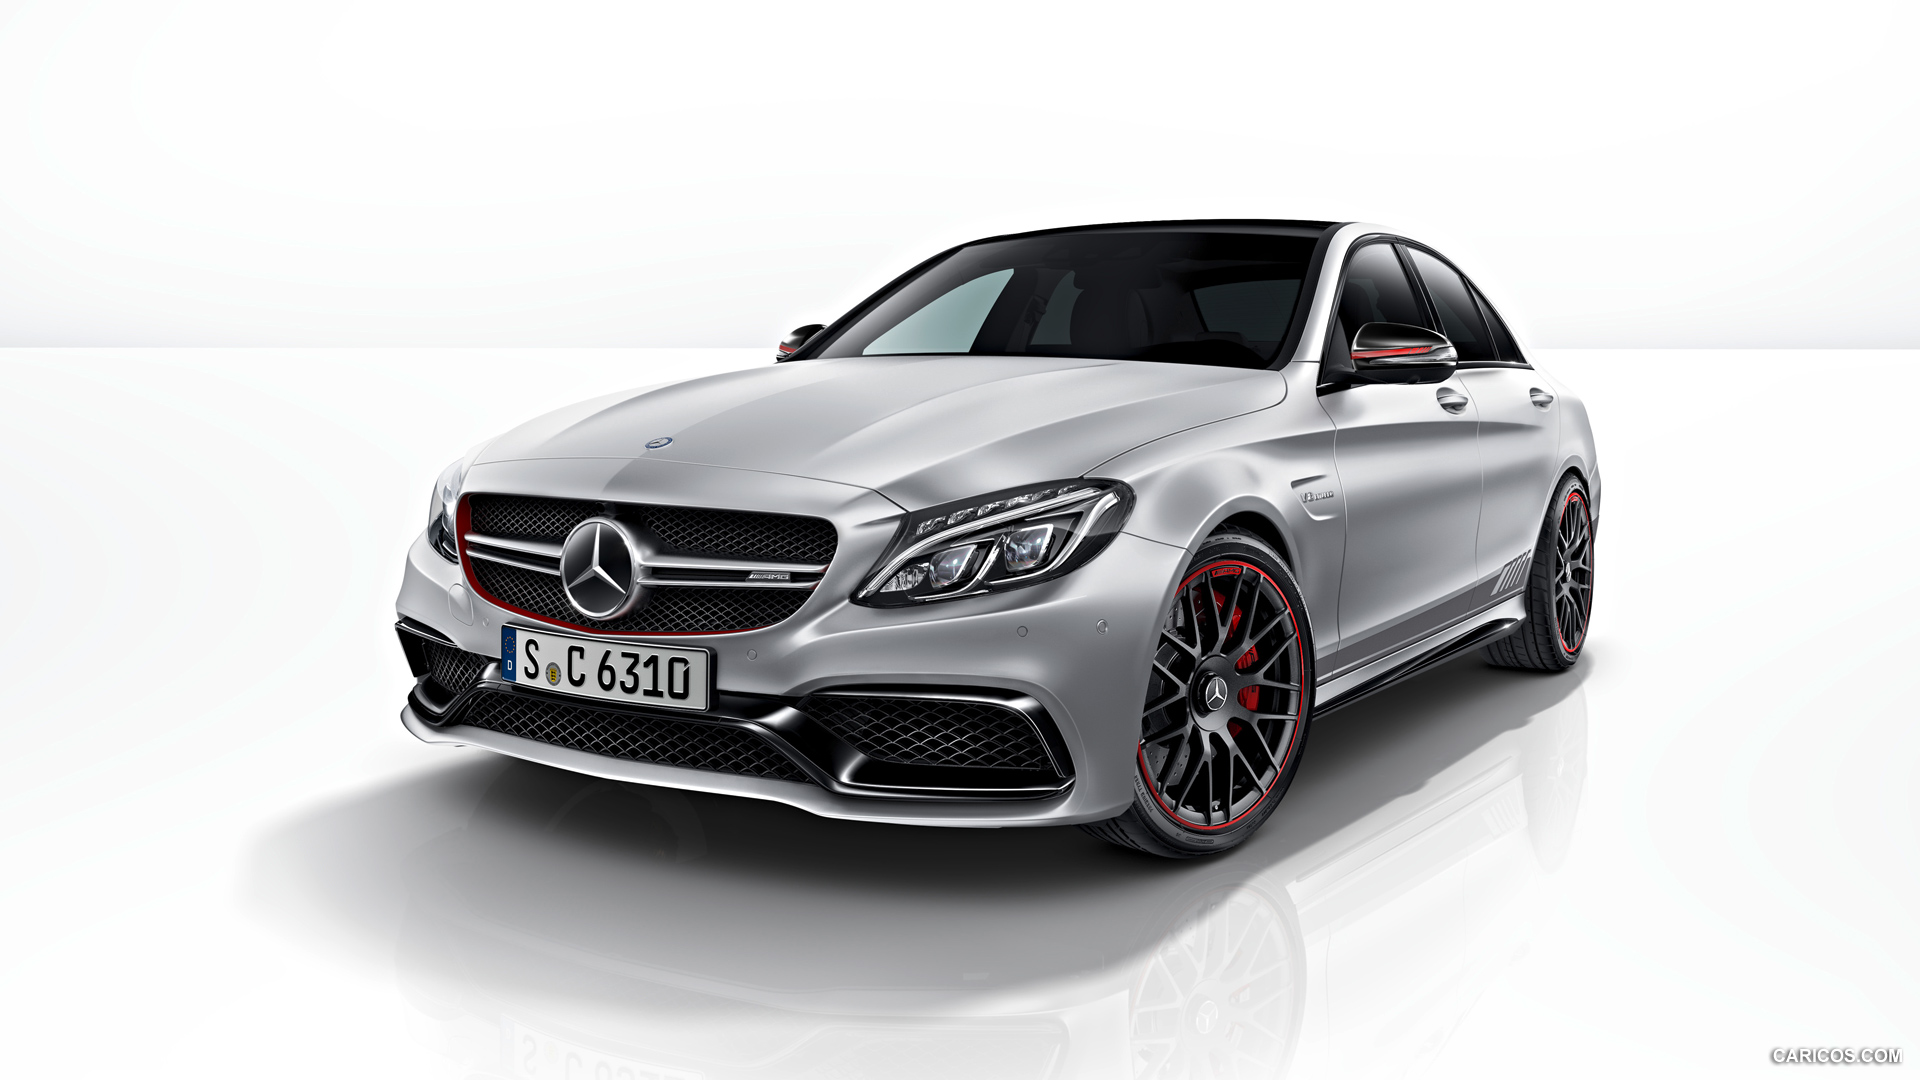  2015 Mercedes-Benz C63 AMG Edition 1 - Front, #1 of 13